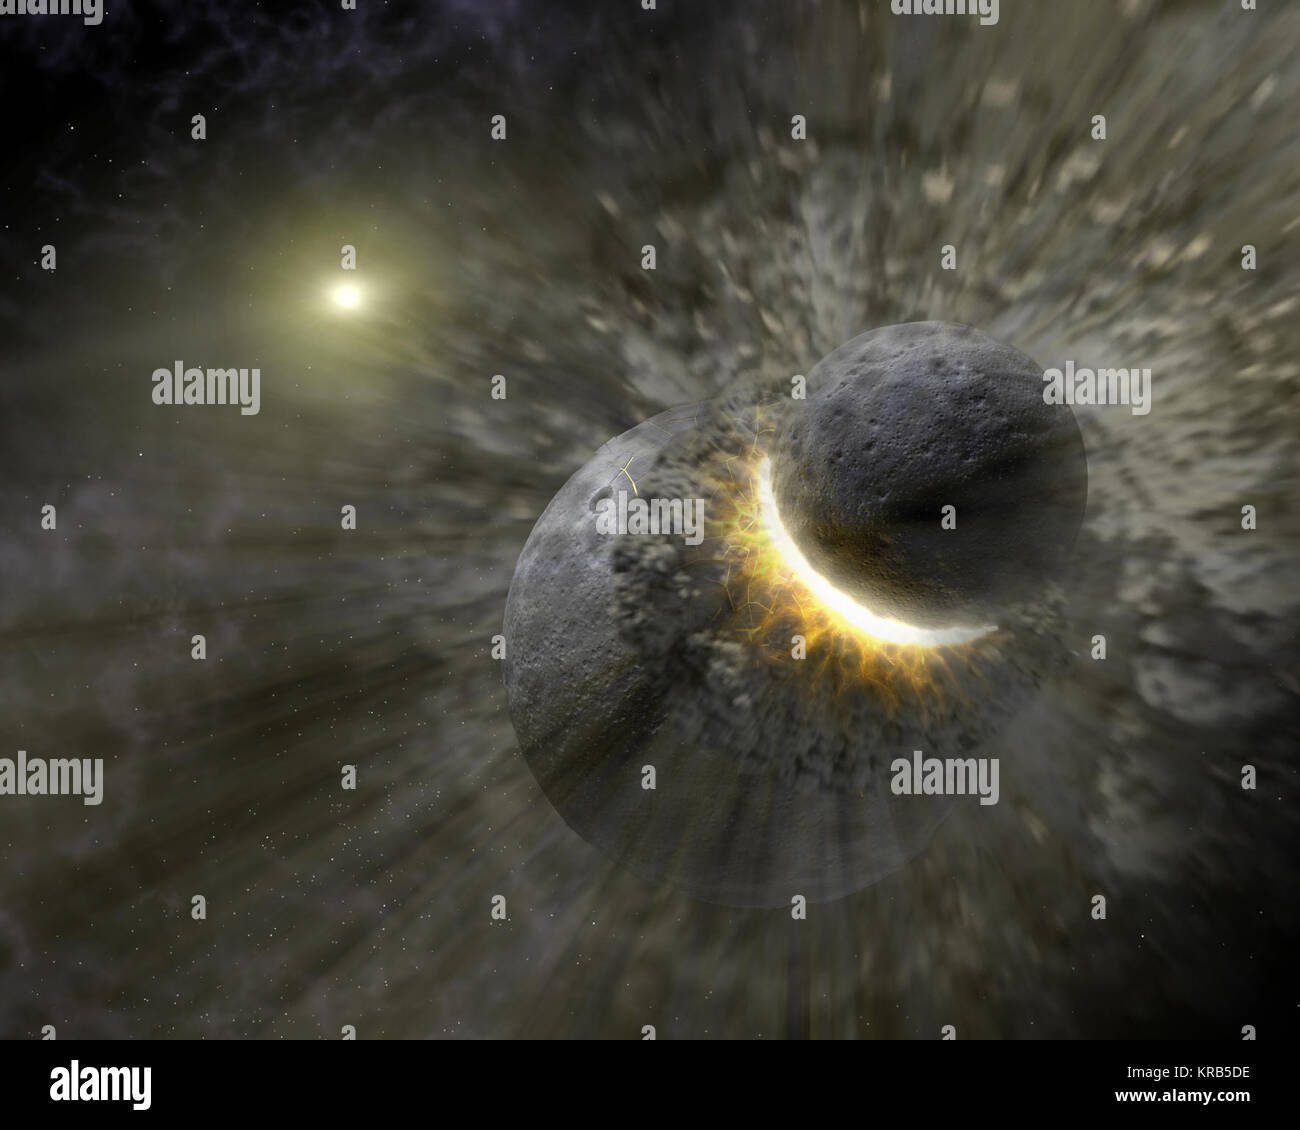 This artist concept illustrates how a massive collision of objects, perhaps as large as the planet Pluto, smashed together to create the dust ring around the nearby star Vega. New observations from NASA's Spitzer Space Telescope indicate the collision took place within the last one million years. Astronomers think that embryonic planets smashed together, shattered into pieces, and repeatedly crashed into other fragments to create ever finer debris.  In the image, a collision is seen between massive objects that measured up to 2,000 kilometers (about 1,200 miles) in diameter. Scientists say the Stock Photo